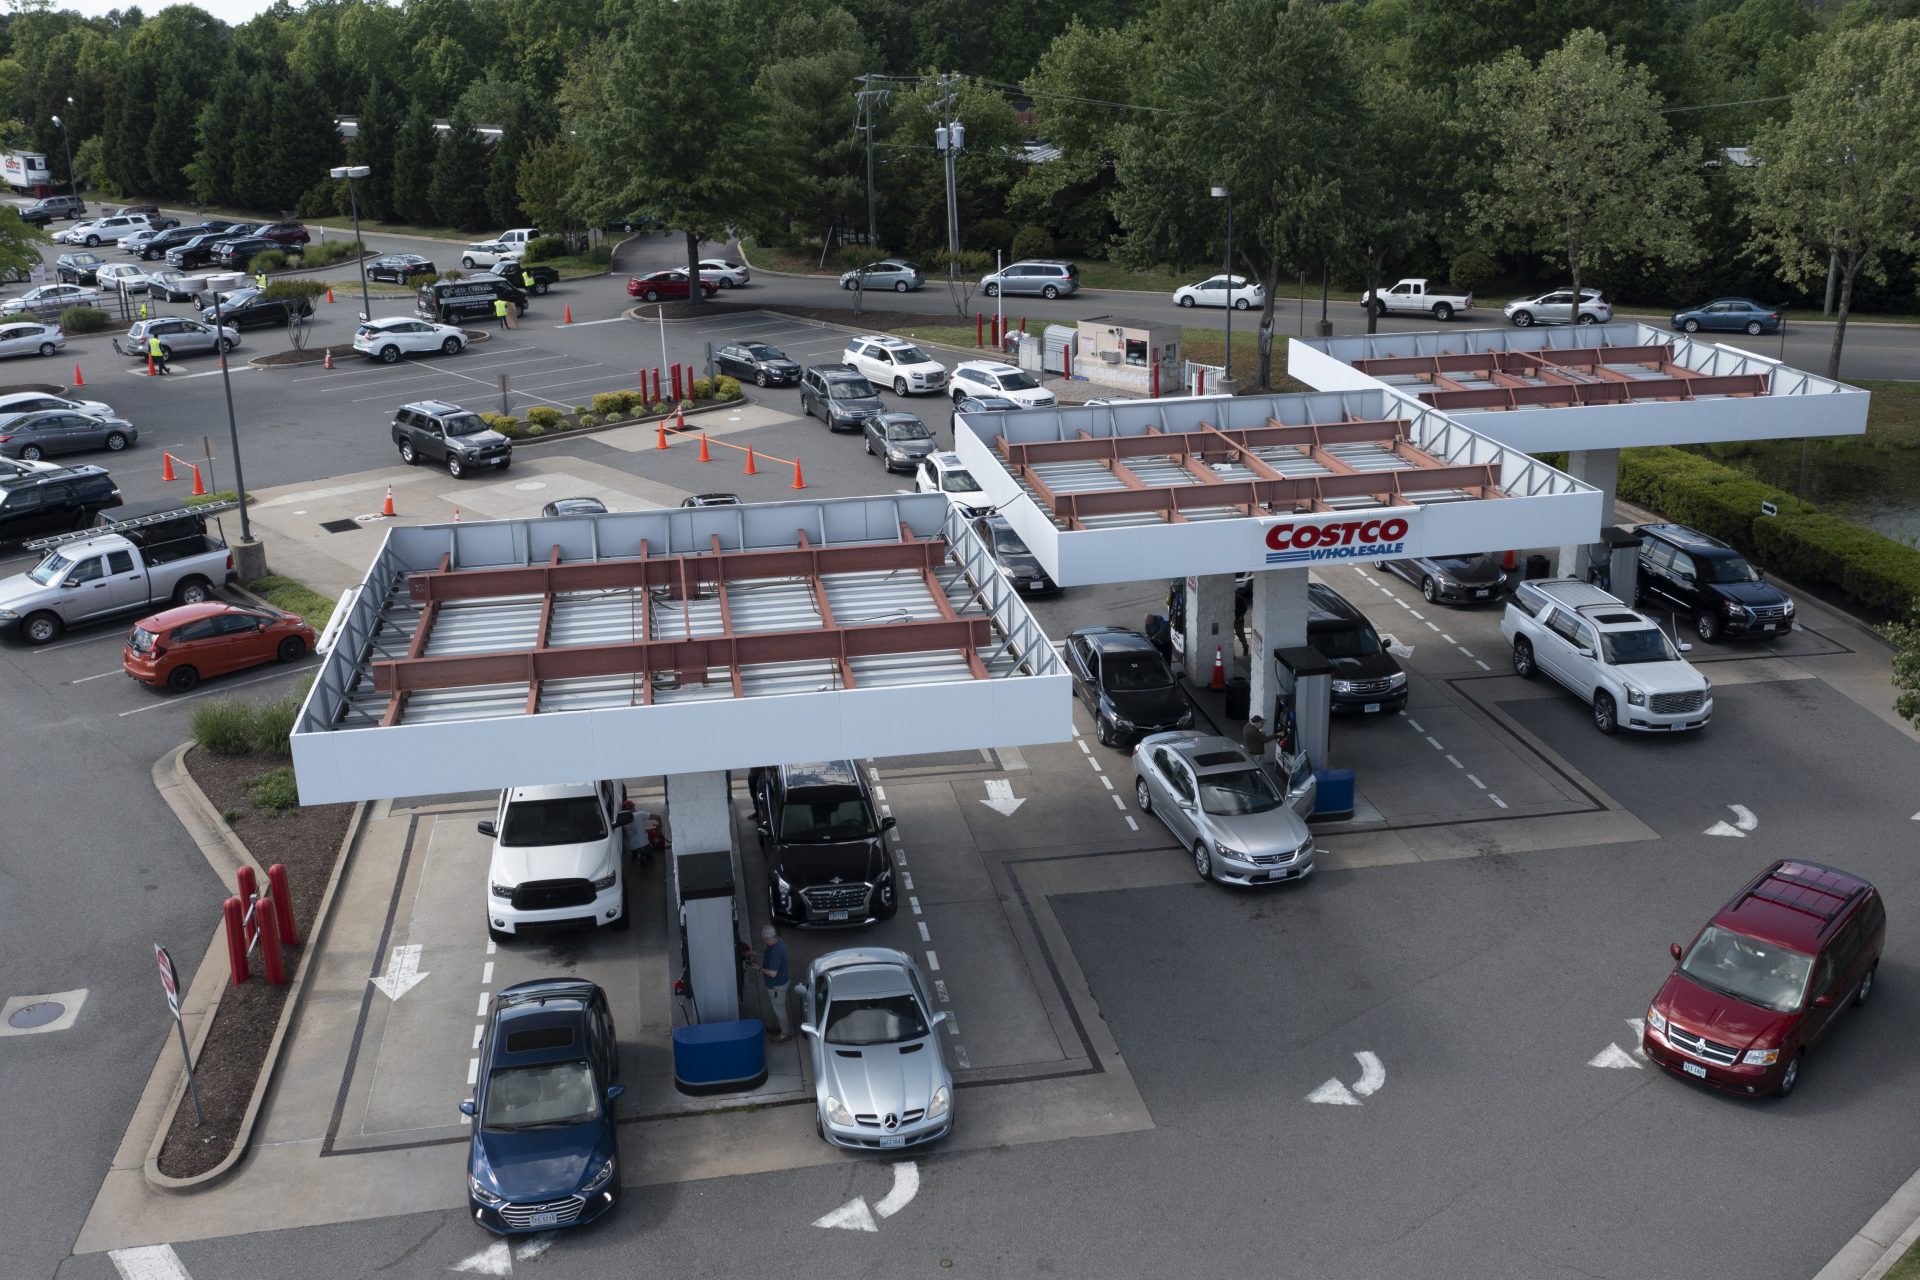 Gas customers swarm a COSTCO gas station amid fears of a gas shortage in Richmond, Va., Tuesday, May 11, 2021. The line at the facility extended around the entire building.